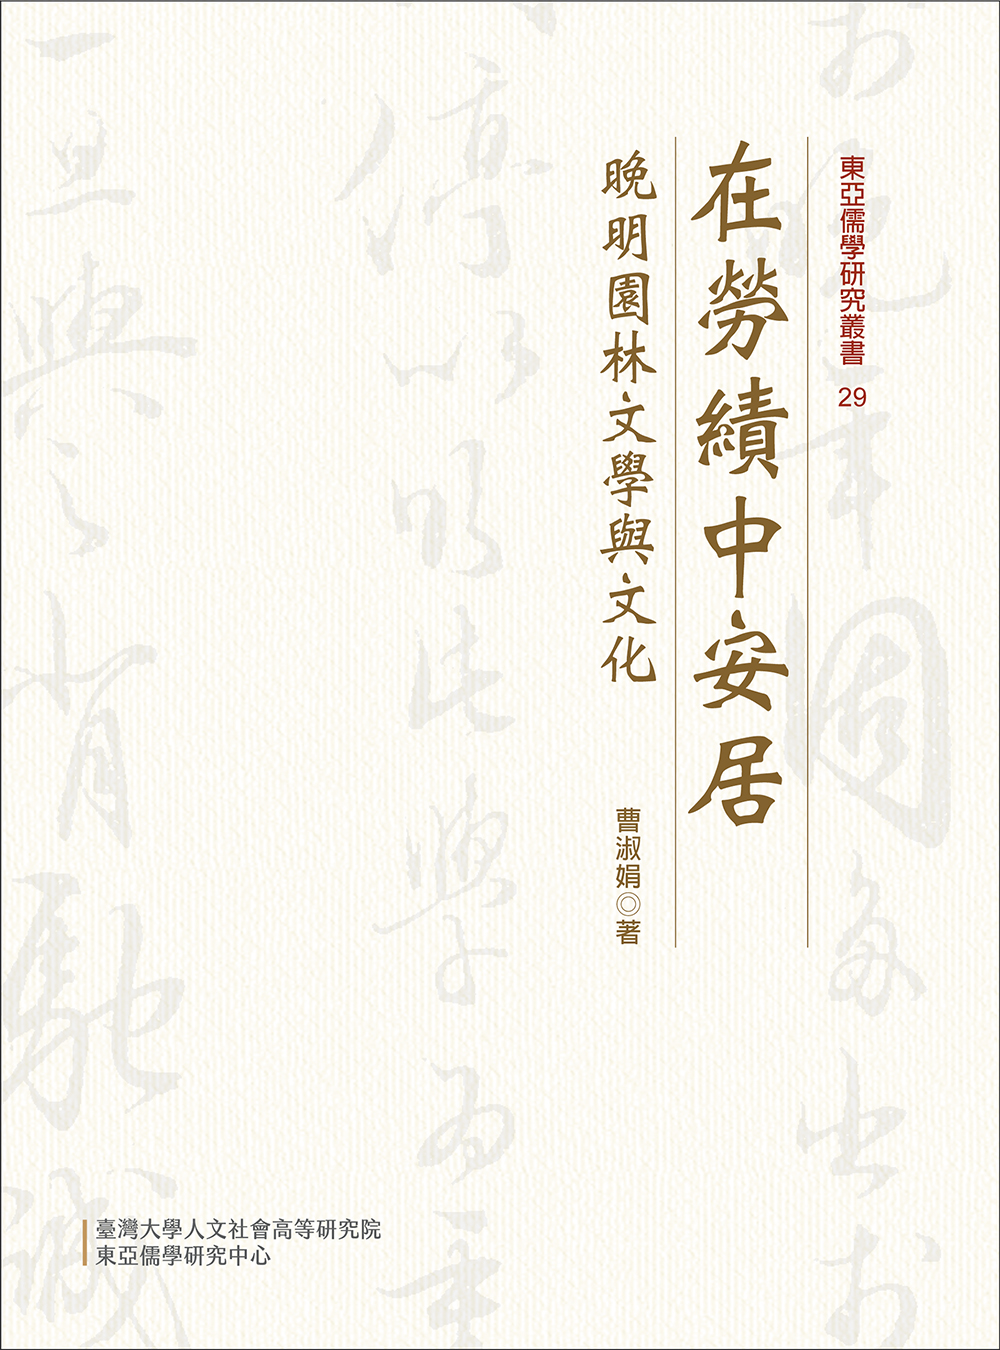 Composure in Laboriousness: Literature and Culture of Garden in Late Ming China